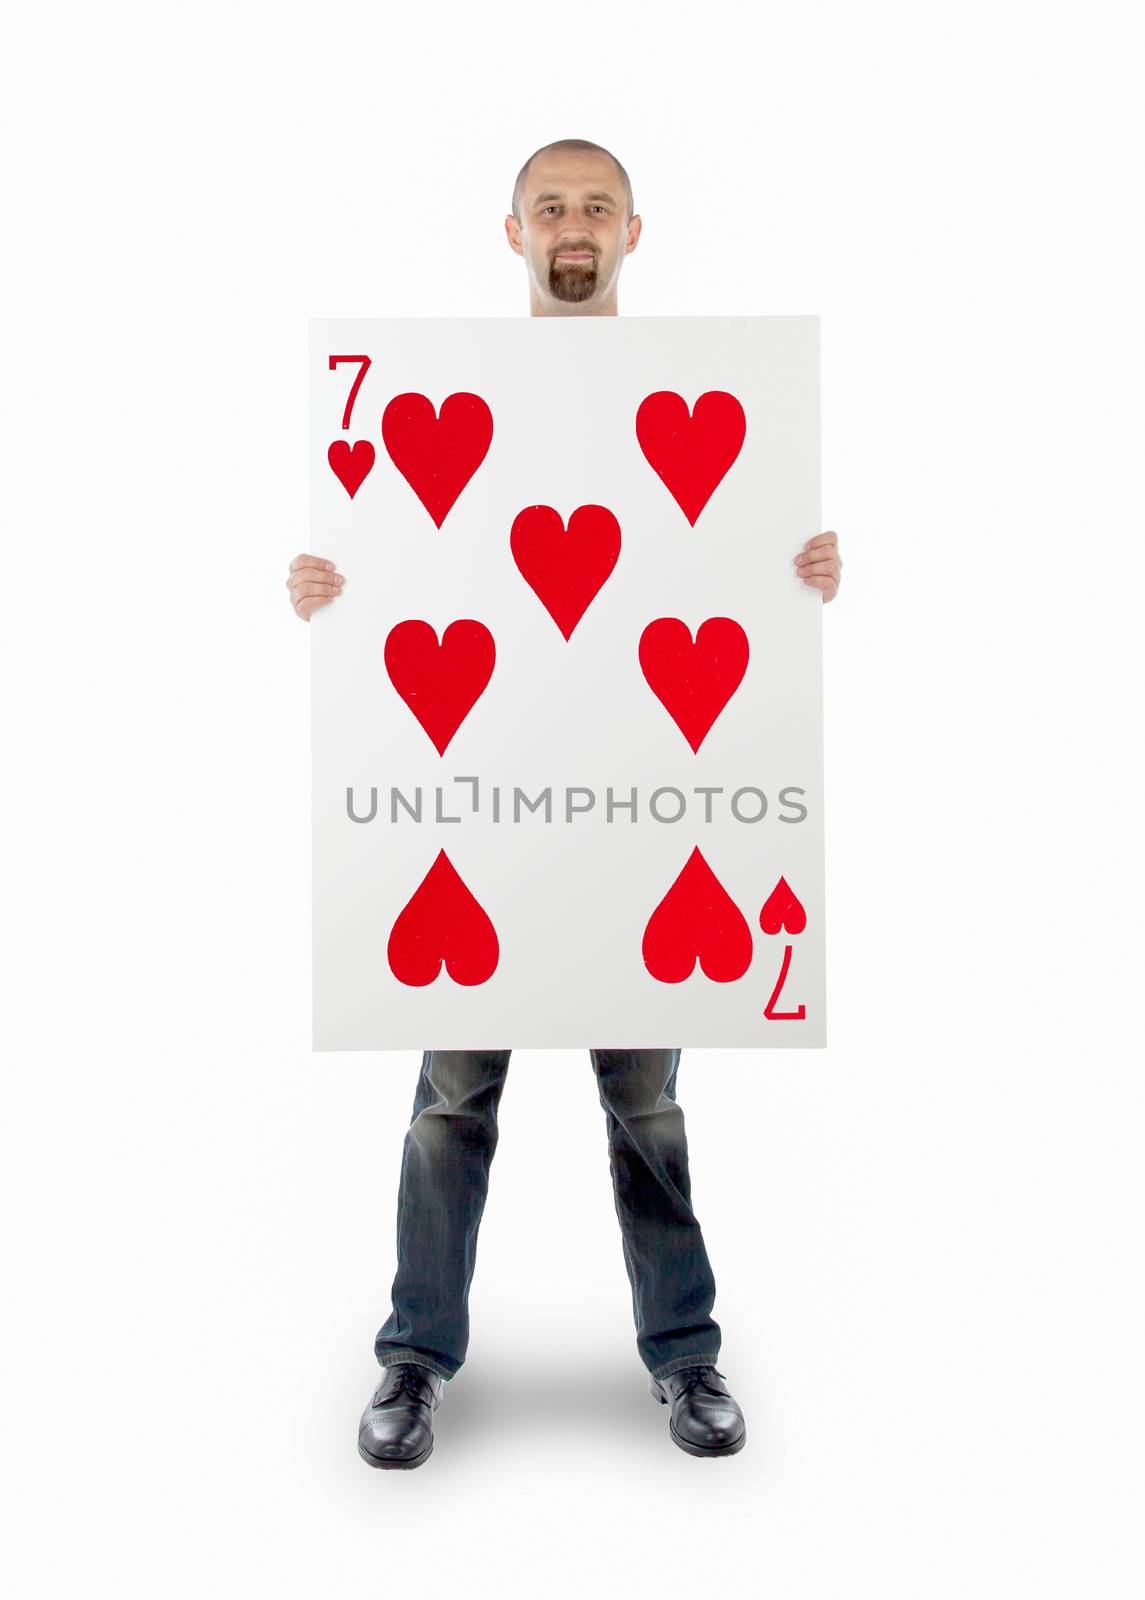 Businessman with large playing card - Seven of hearts